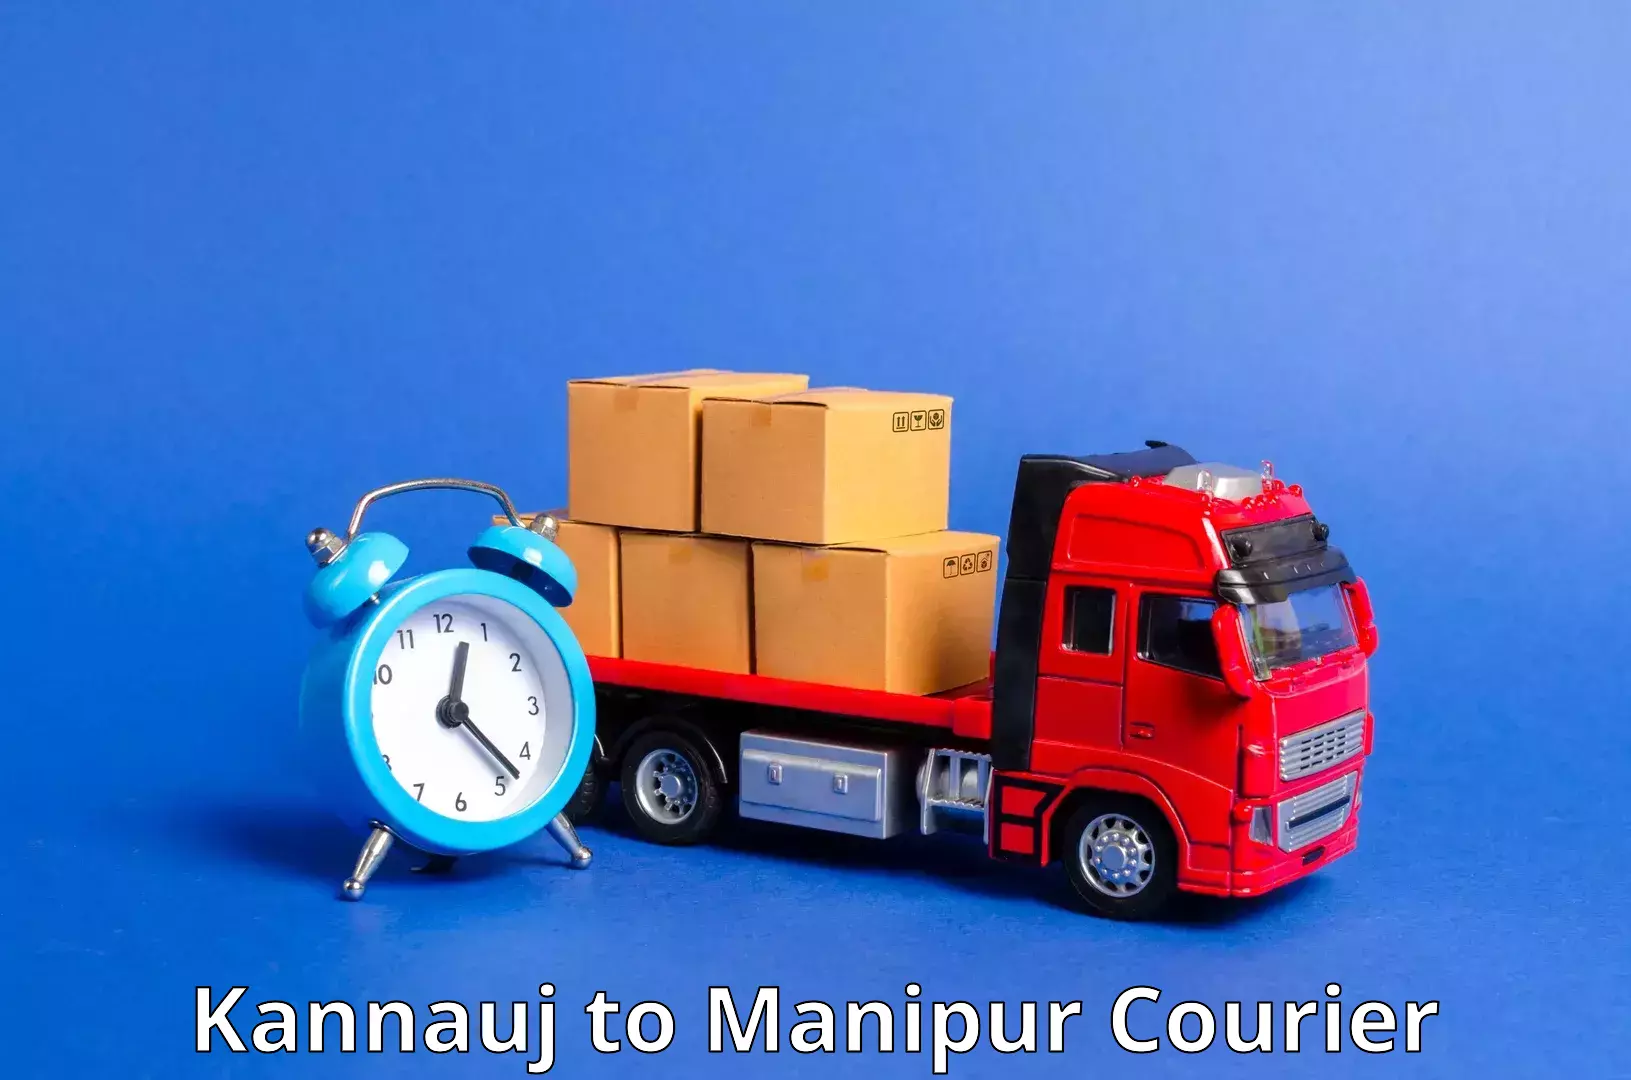 Reliable delivery network Kannauj to Manipur